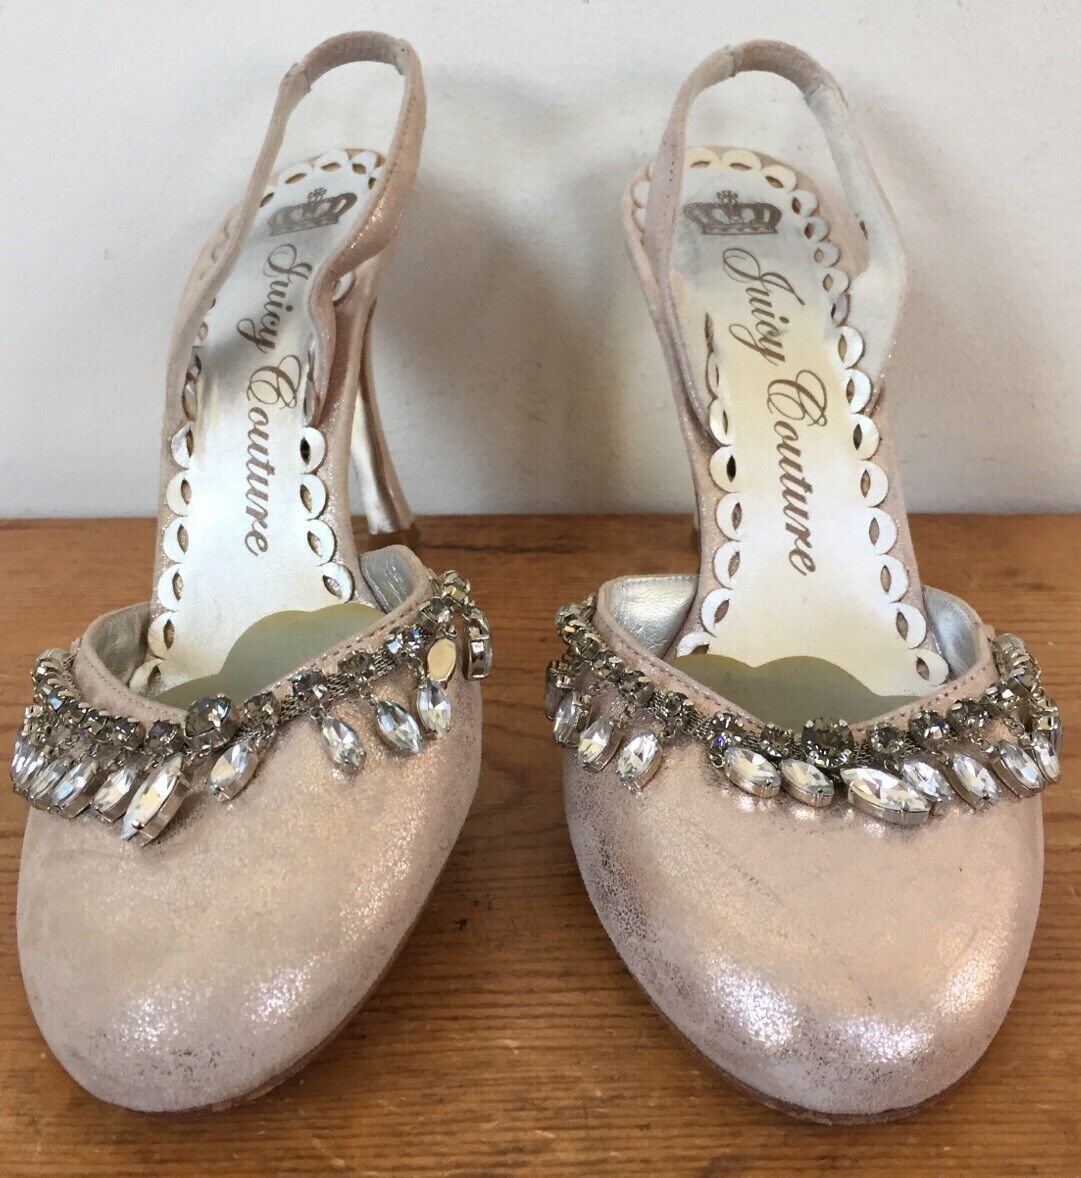 Juicy Couture Pink Metallic Rhinestone Max 84% Free shipping on posting reviews OFF Heels Slingback P Sparkle